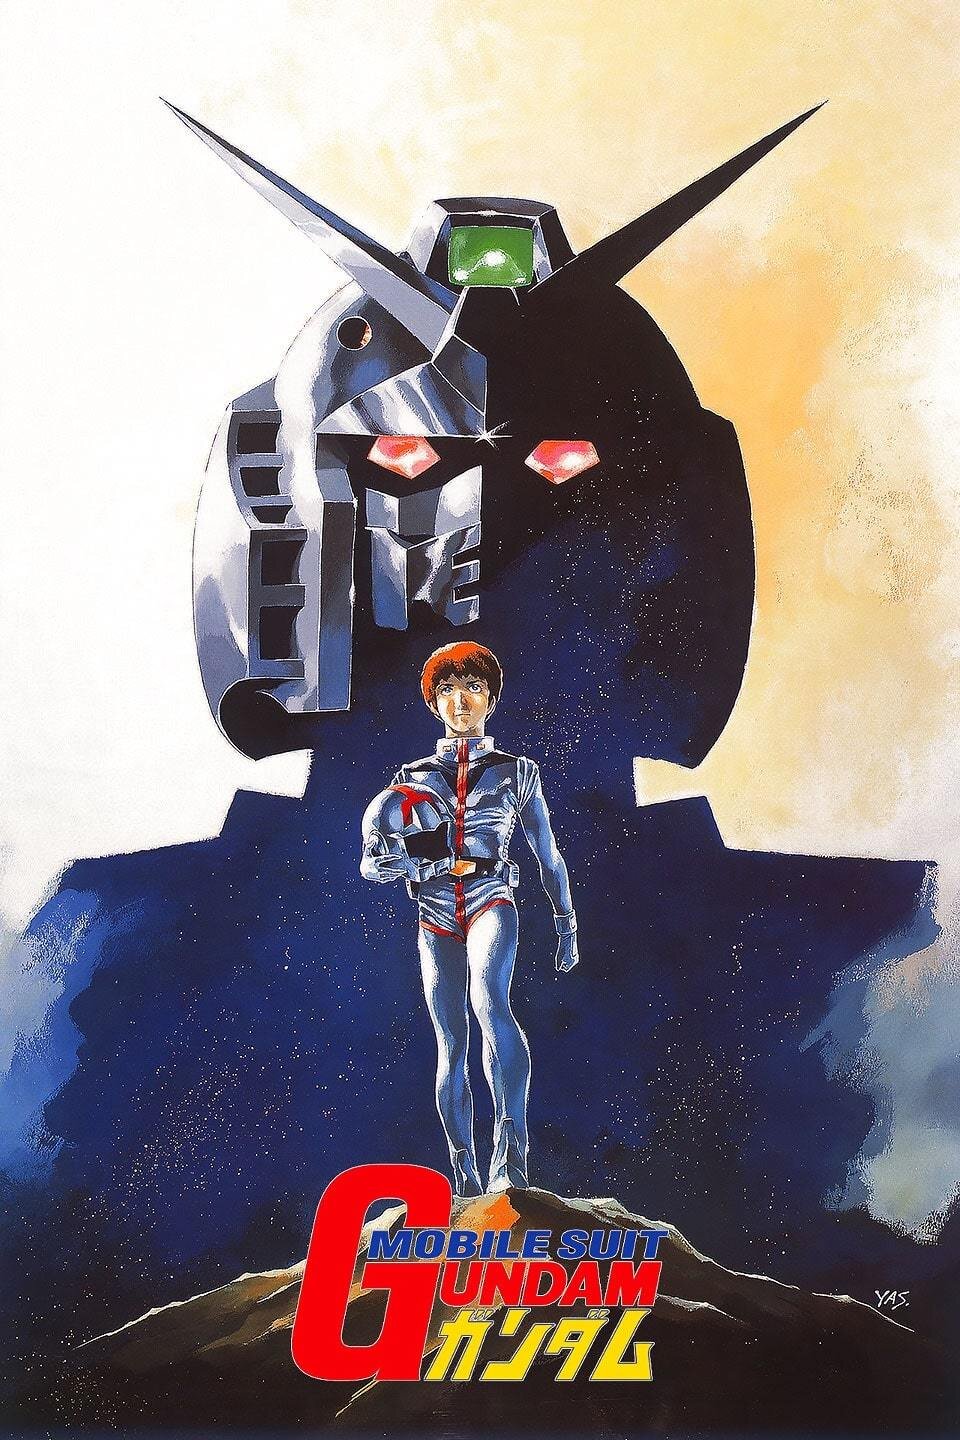 A darker Mobile Suit Gundam cover.